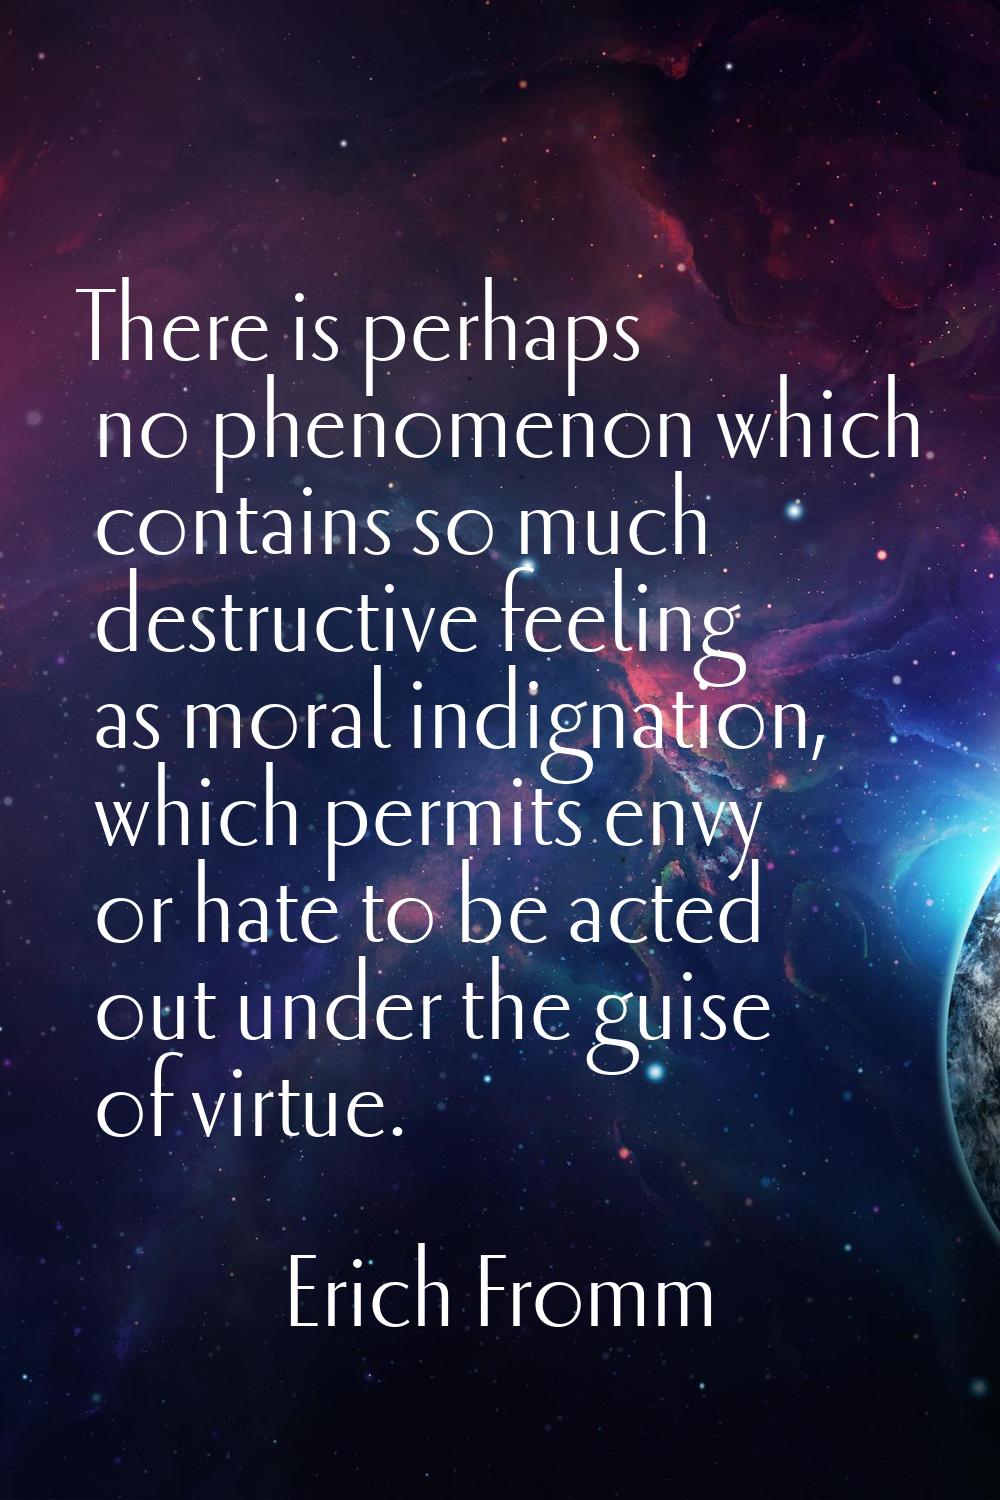 There is perhaps no phenomenon which contains so much destructive feeling as moral indignation, whi